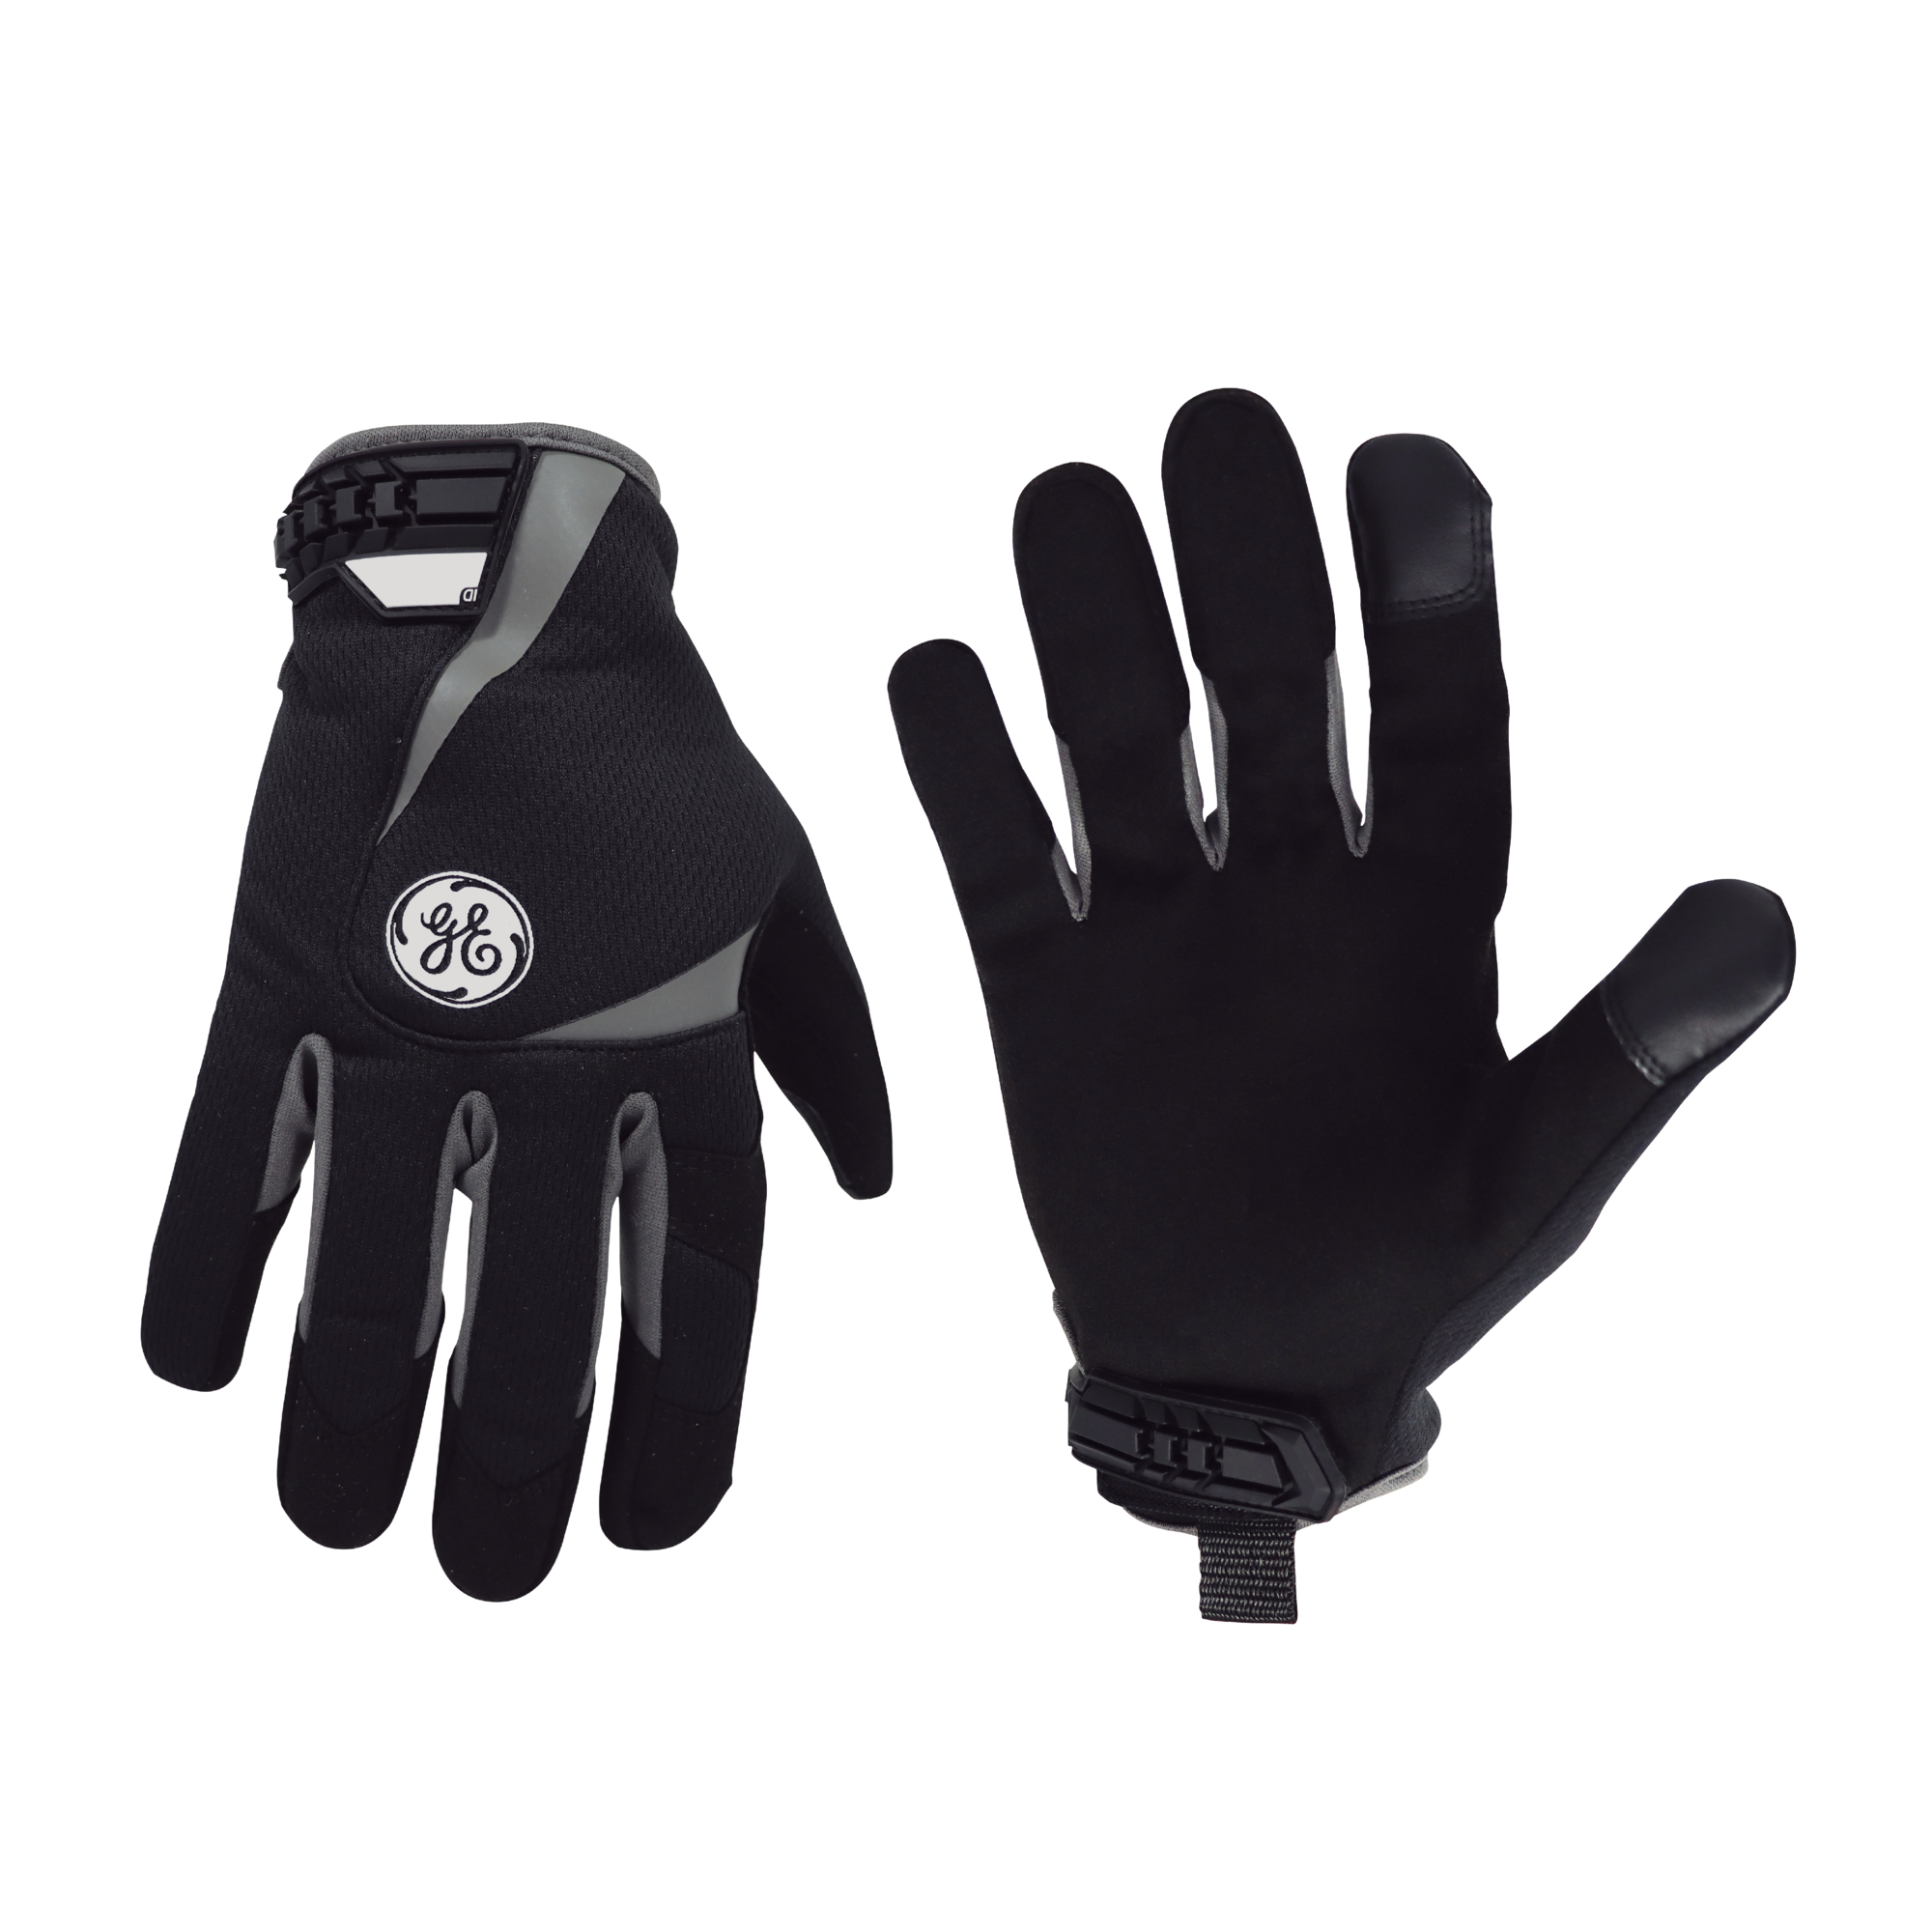 General Electric, Mechanic's Glove Black/Gray XL 1 pair, Size XL, Included (qty.) 1, Model GG401XLC